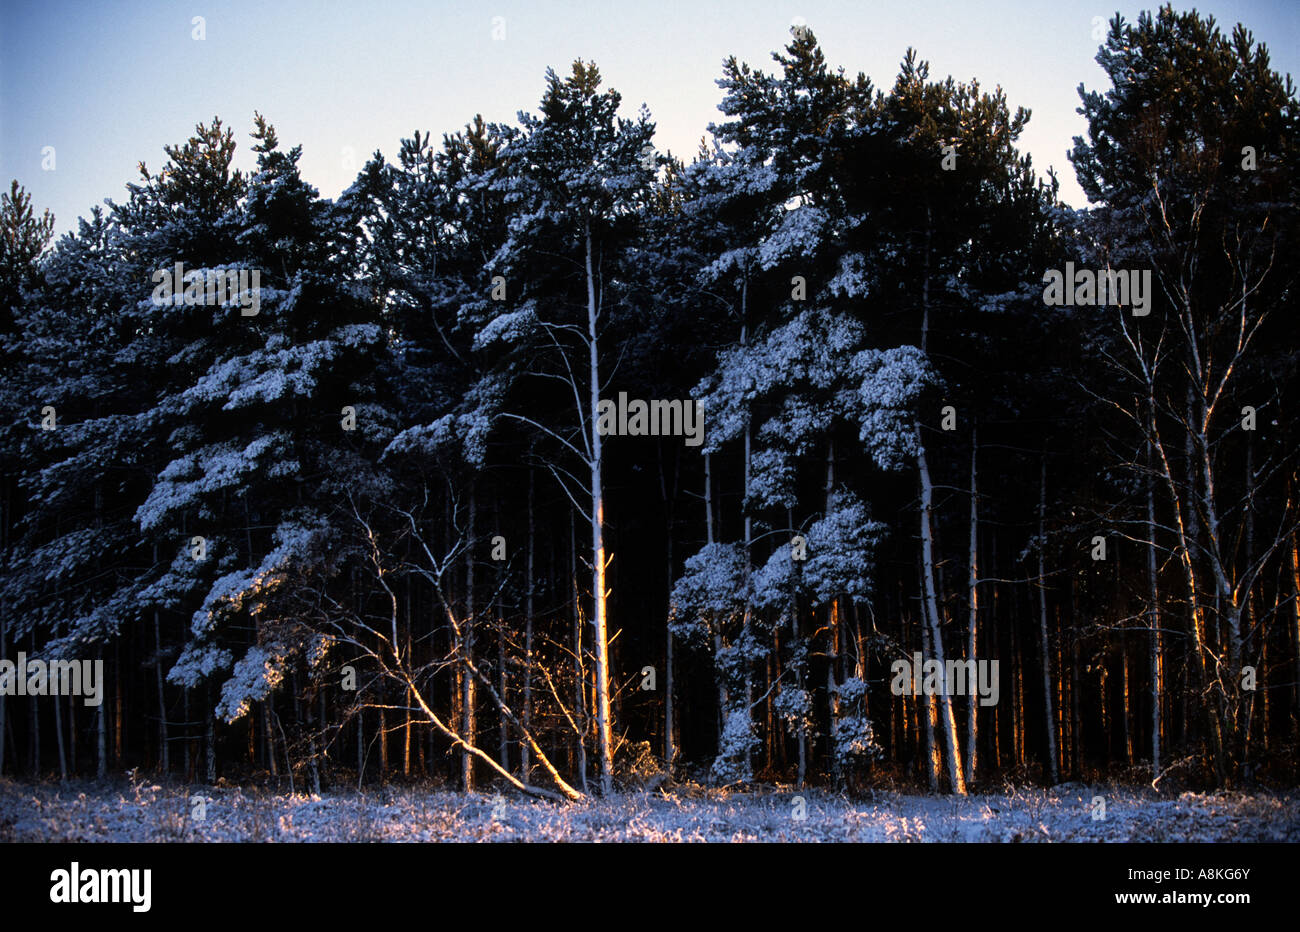 Snow covering pine trees in Rendlesham Forest, Suffolk, UK. Stock Photo